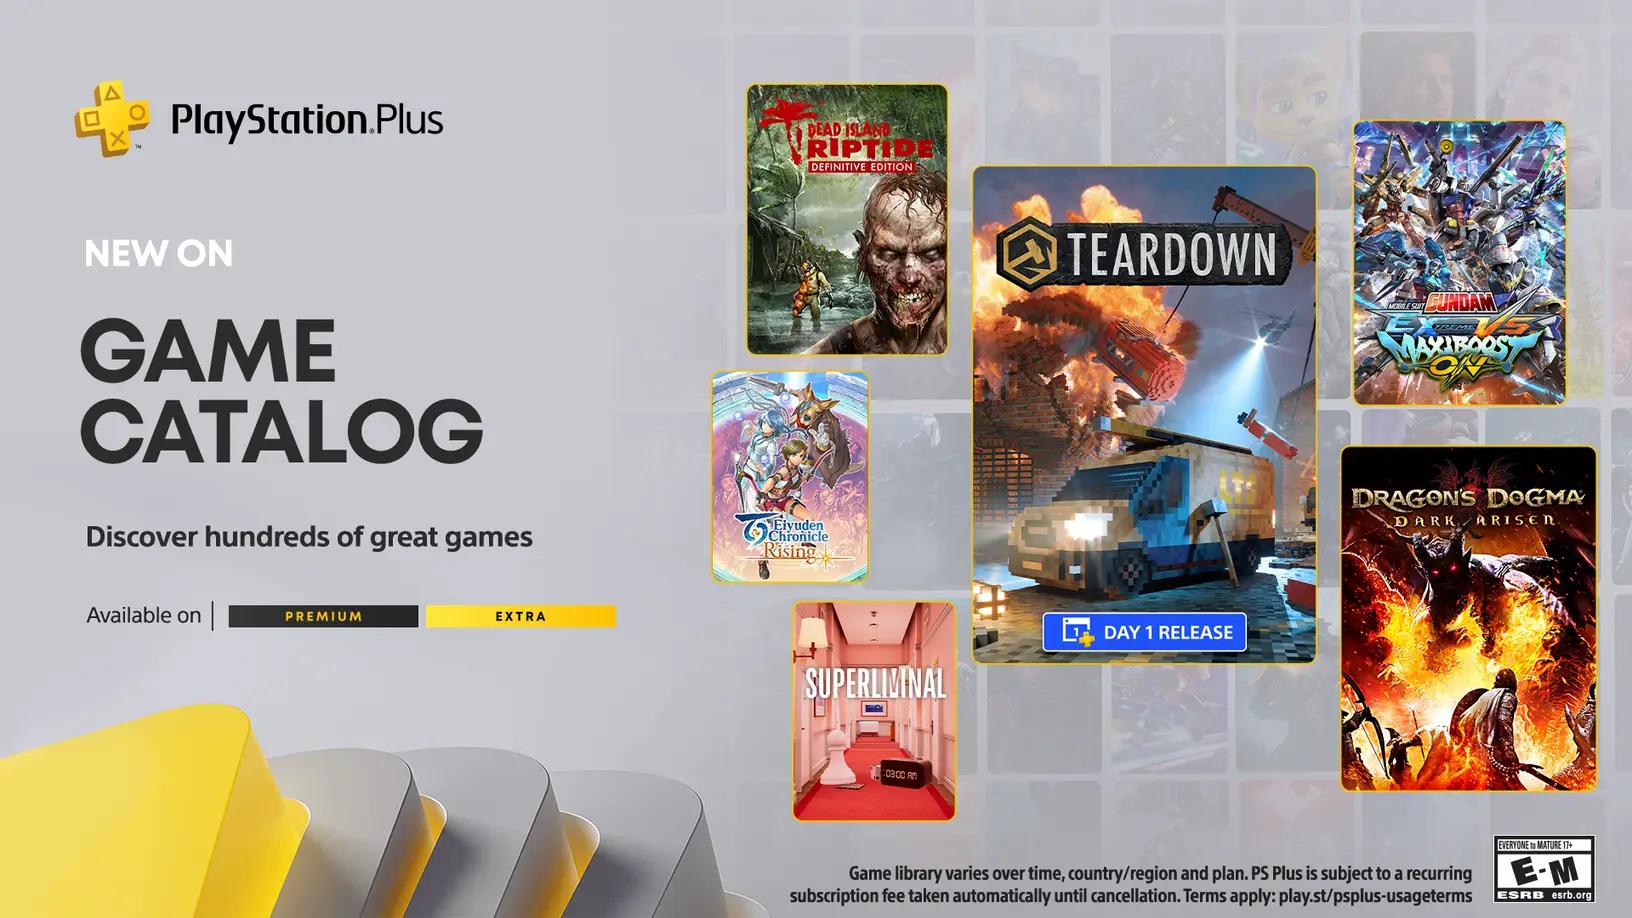 PlayStation Plus memberships have been discounted up to 30% for